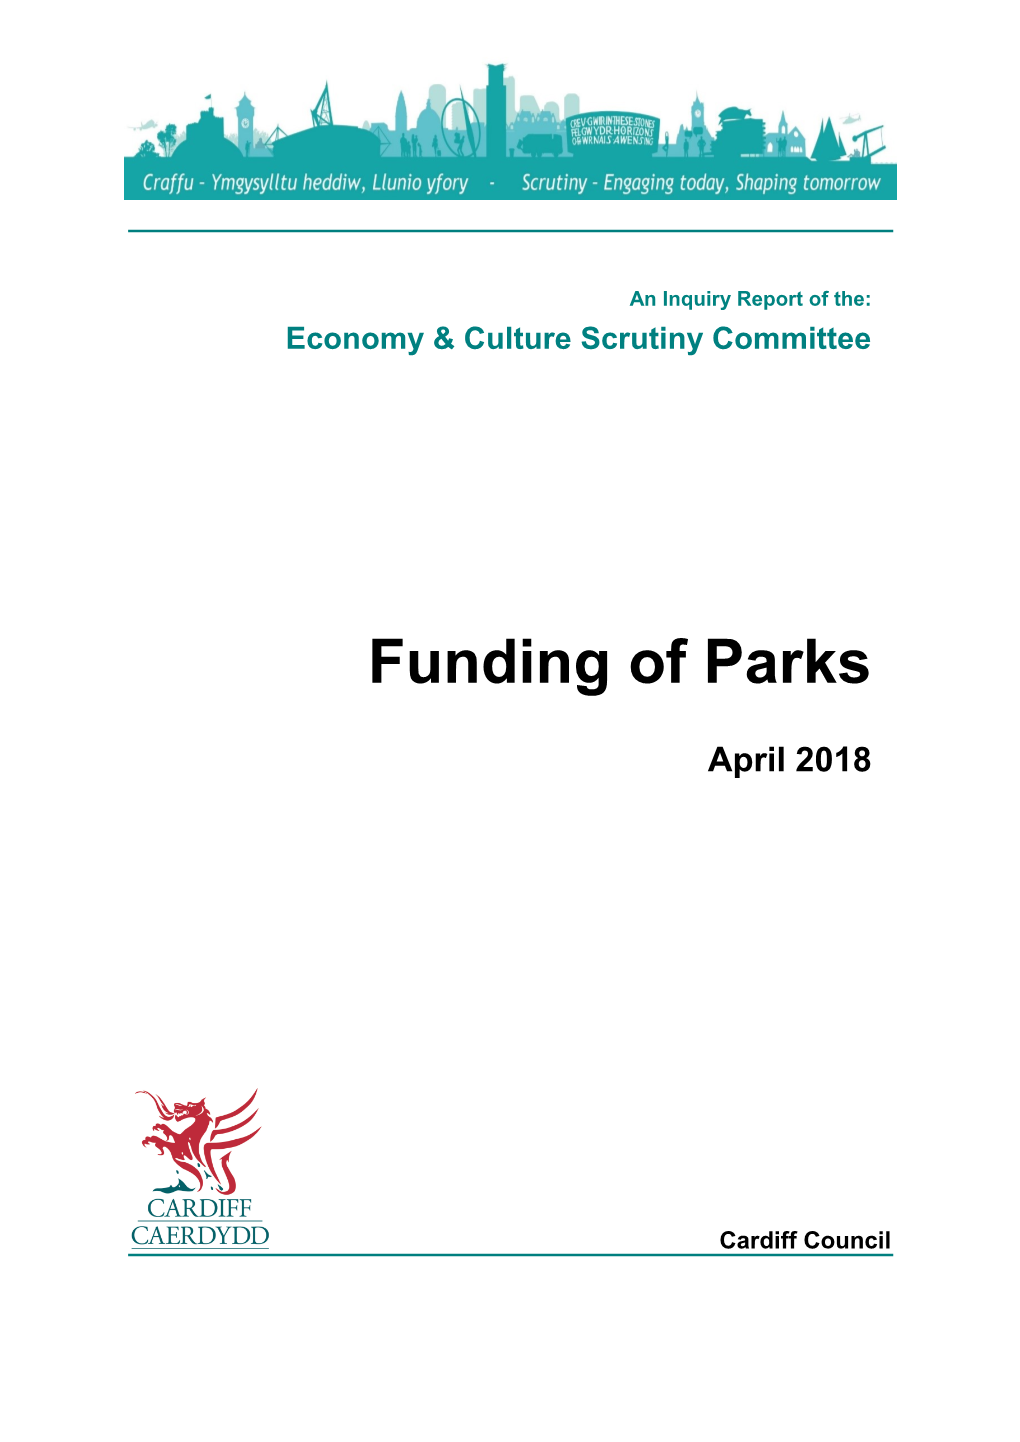 Funding of Parks